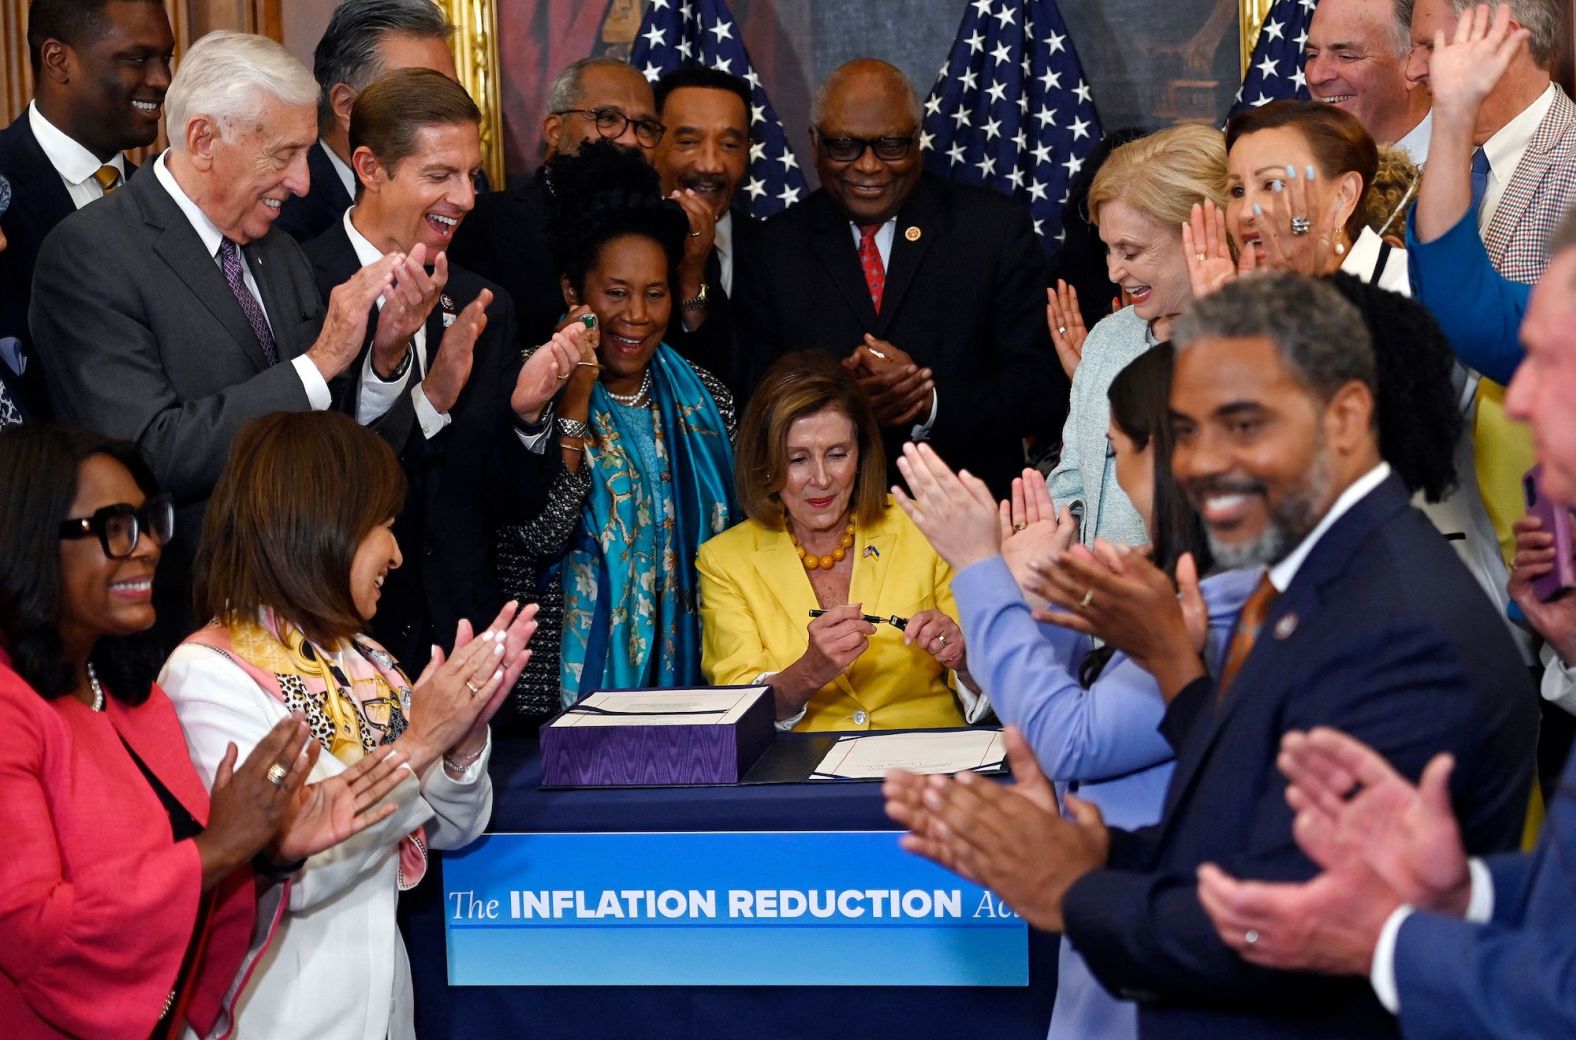 Lawmakers applaud after Pelosi signed the Inflation Reduction Act after the House of Representatives voted 220-207 to pass it in August 2022.